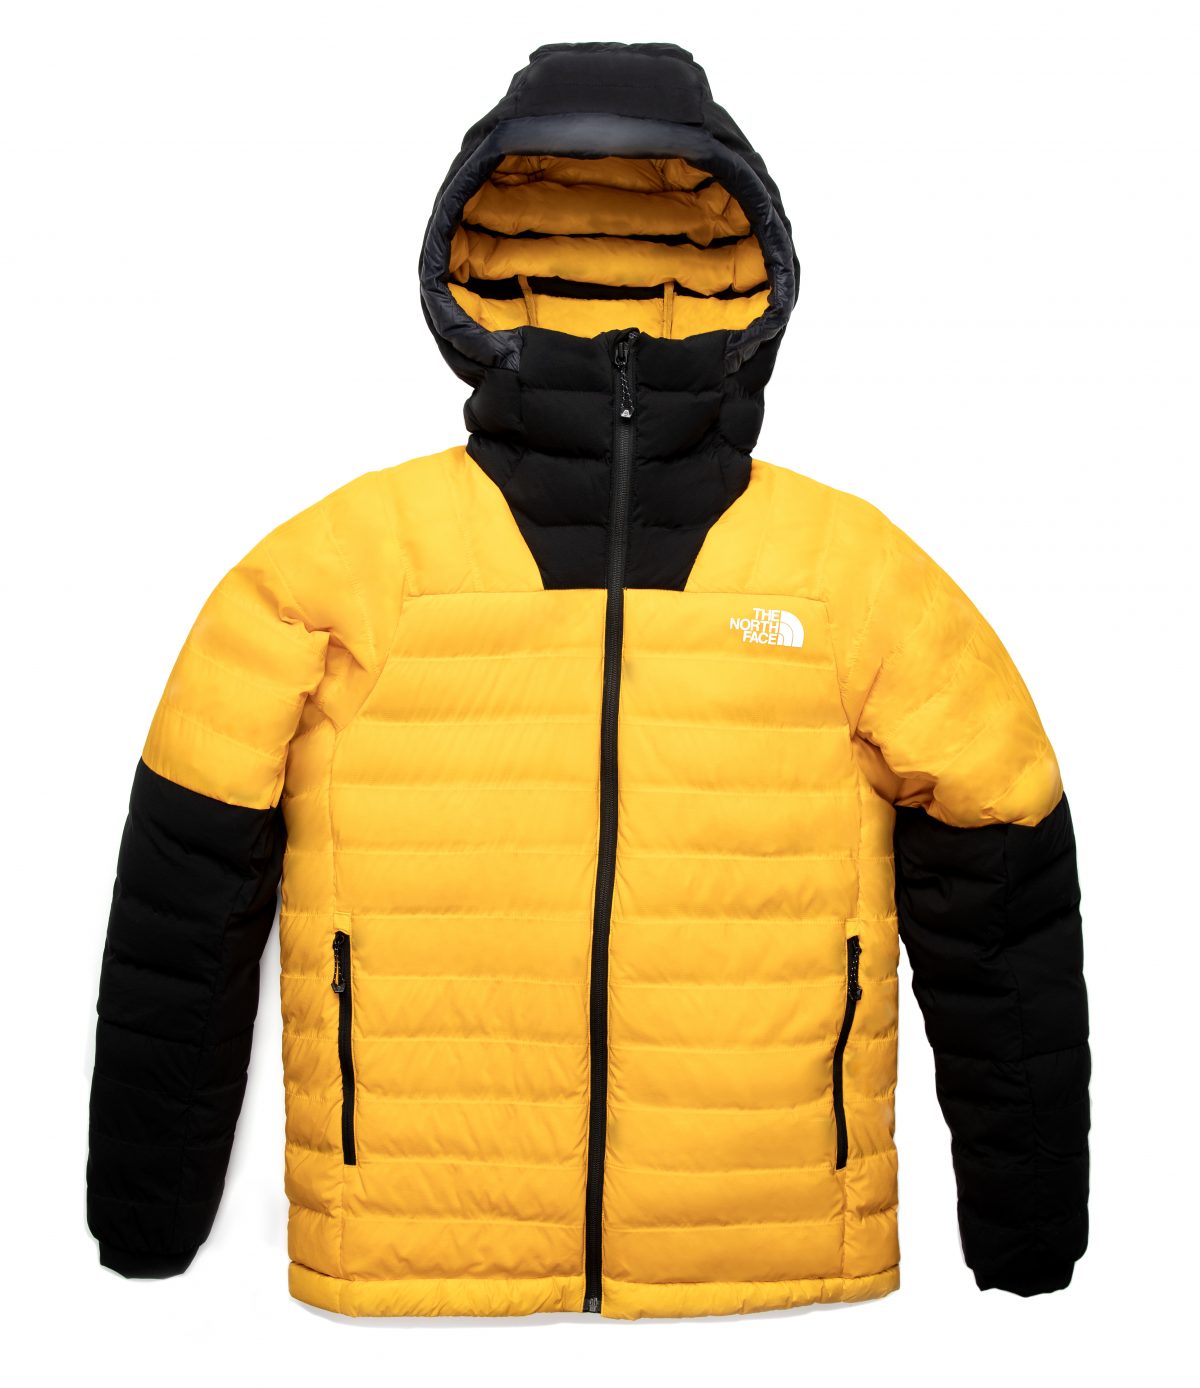 The North Face brings out the Advanced Mountain Kit range – Adventure 52